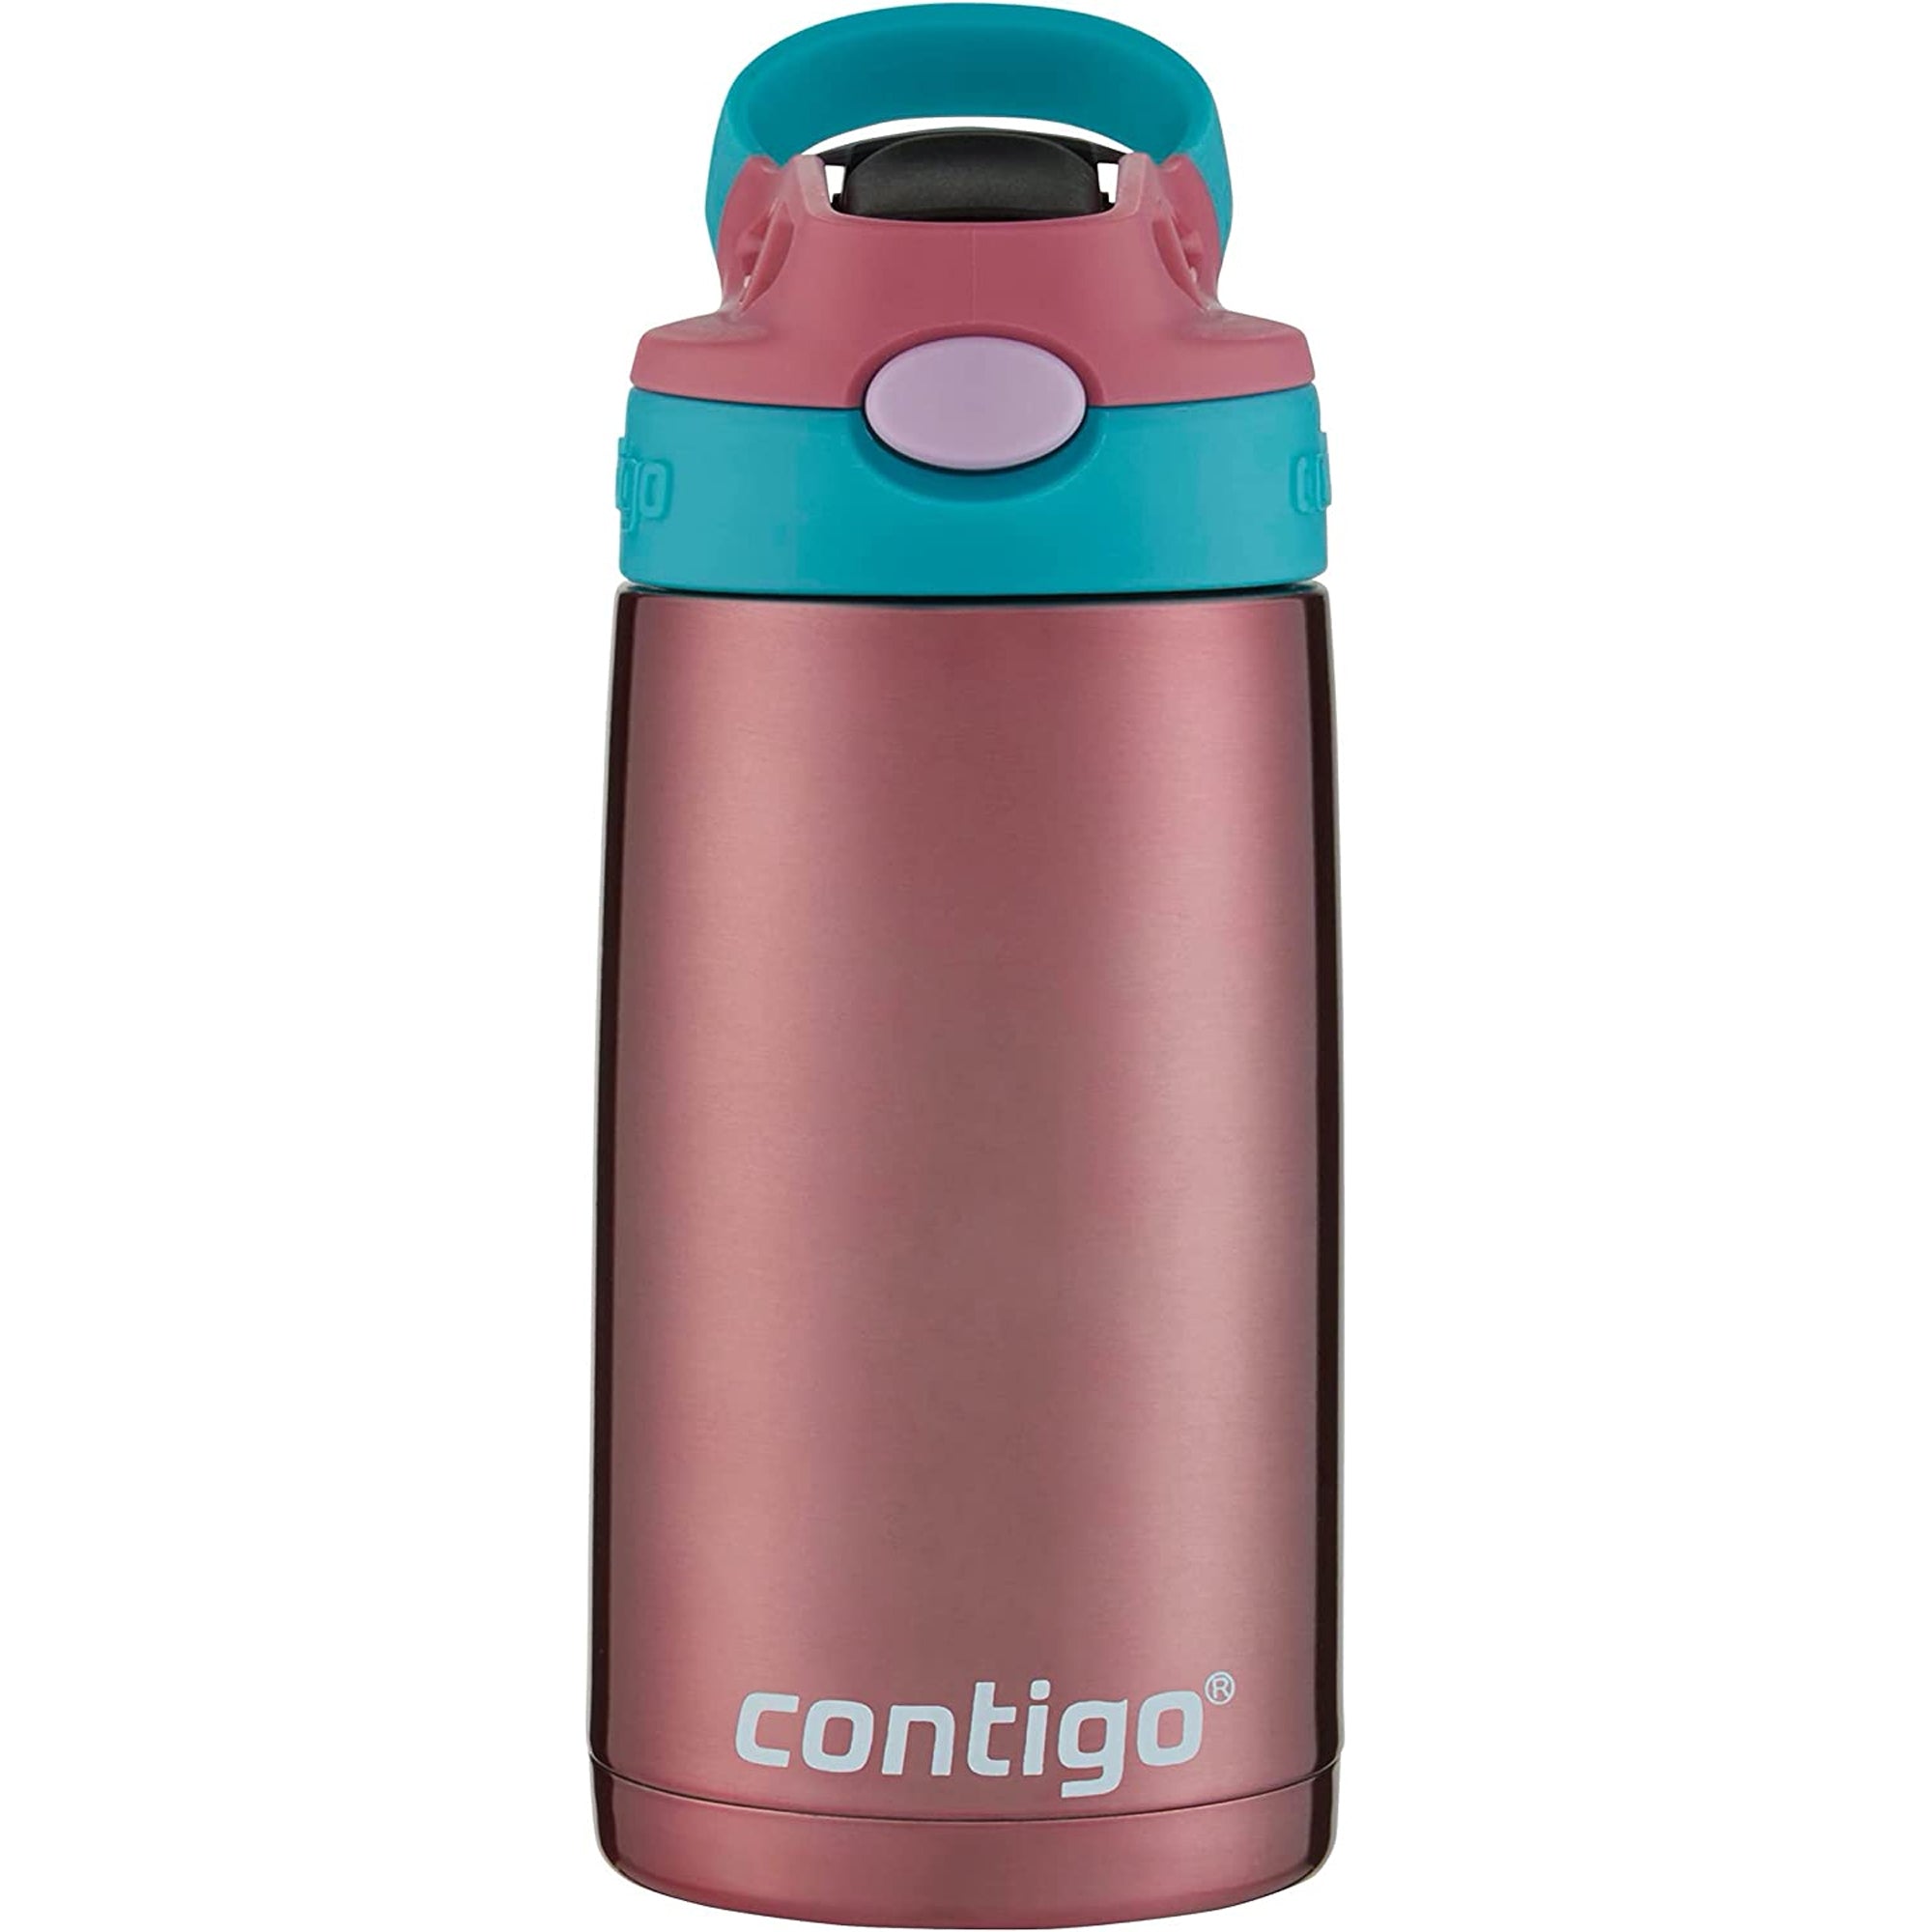 Contigo Vacuum-Insulated Stainless Steel Water Bottle with Quick